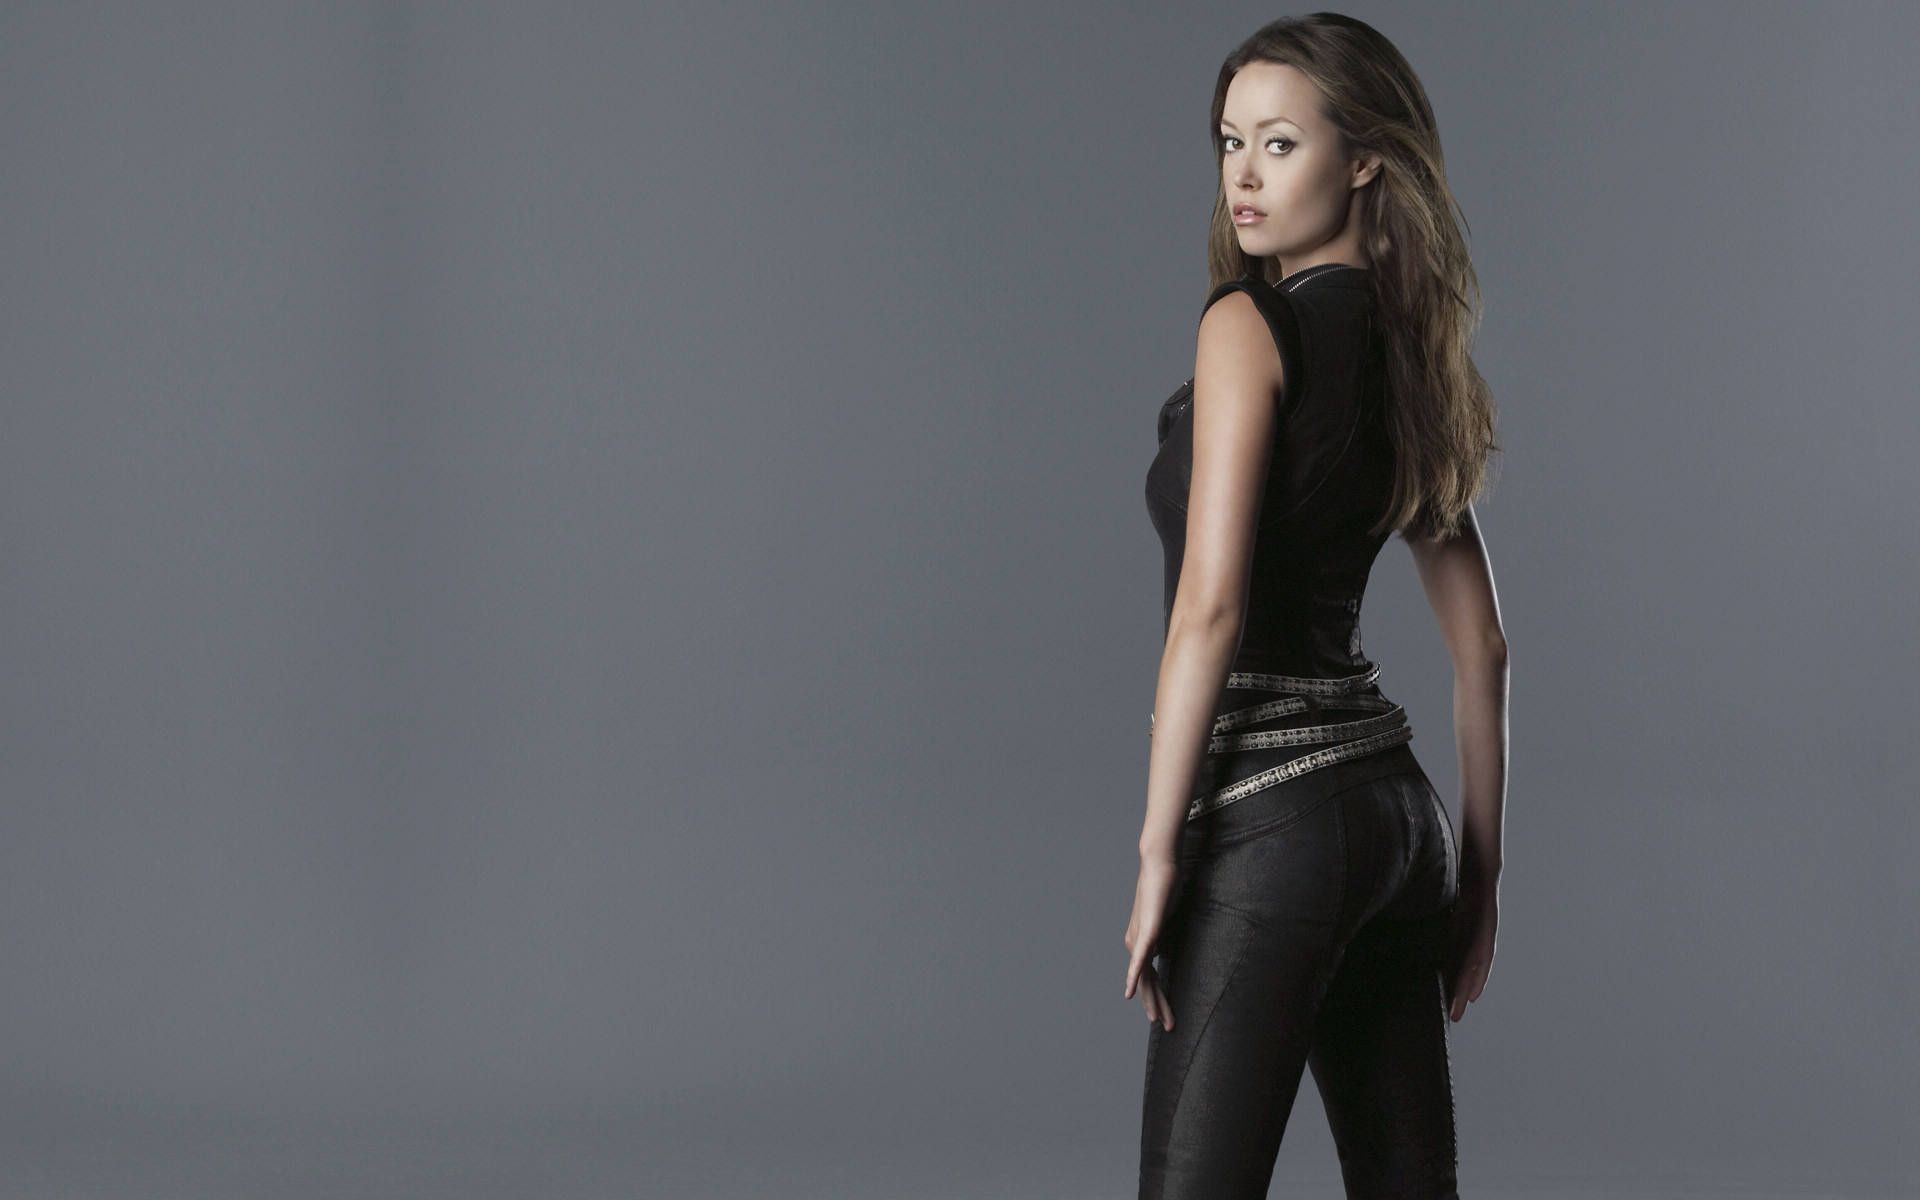 1920x1200 Related Wallpapers from Yvonne Strahovski Wallpaper. Summer Glau